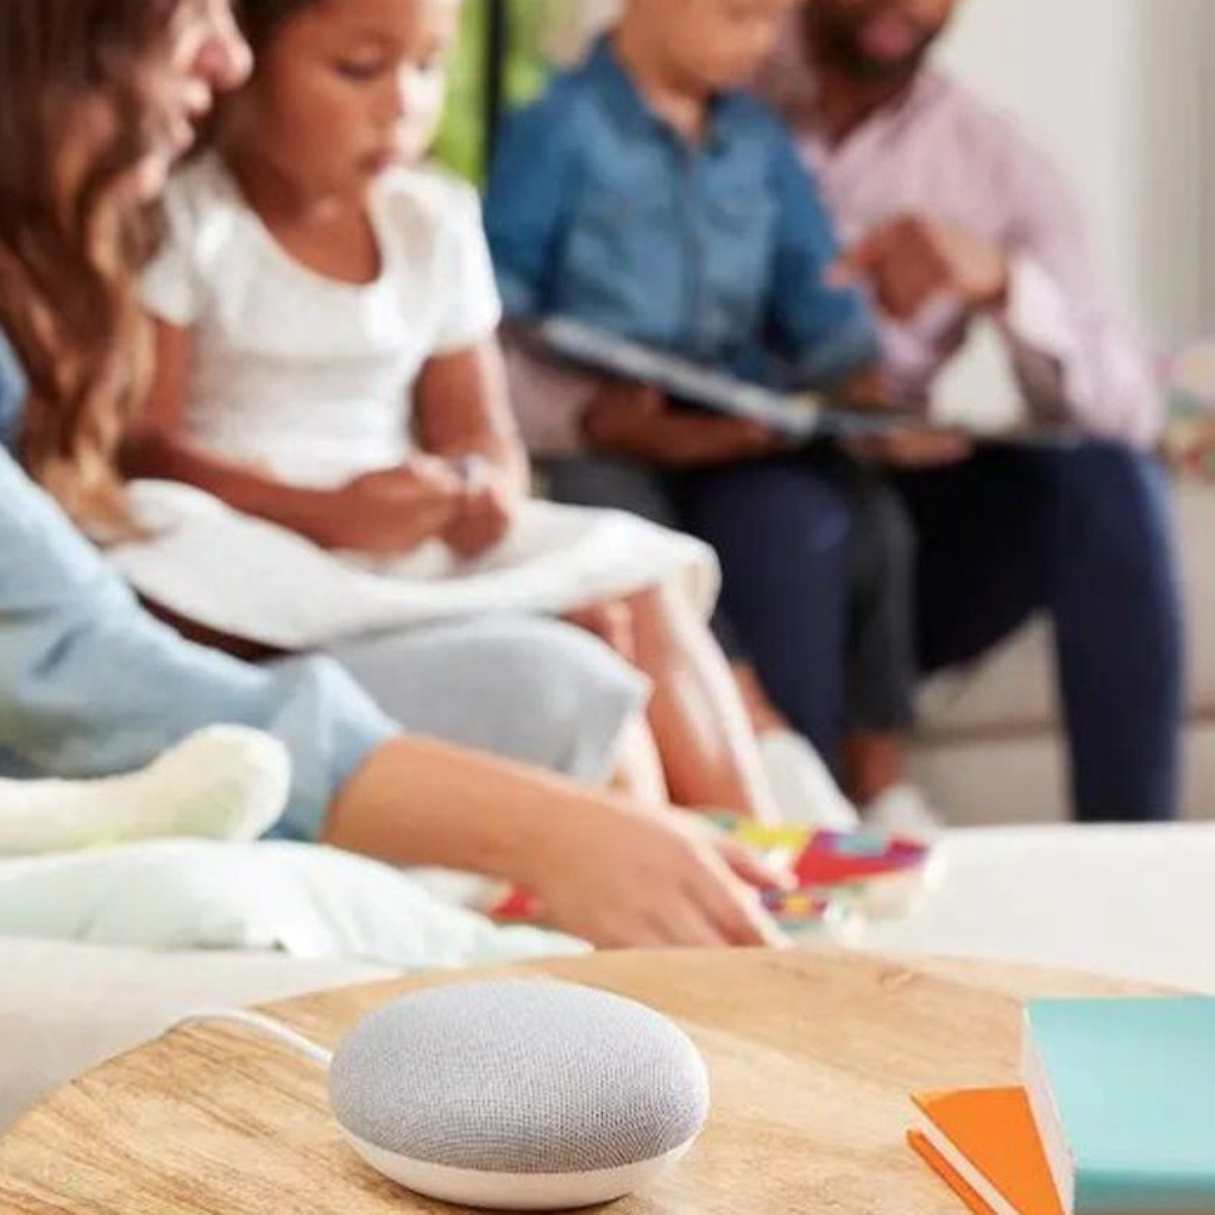 How To Share Alexa With Family